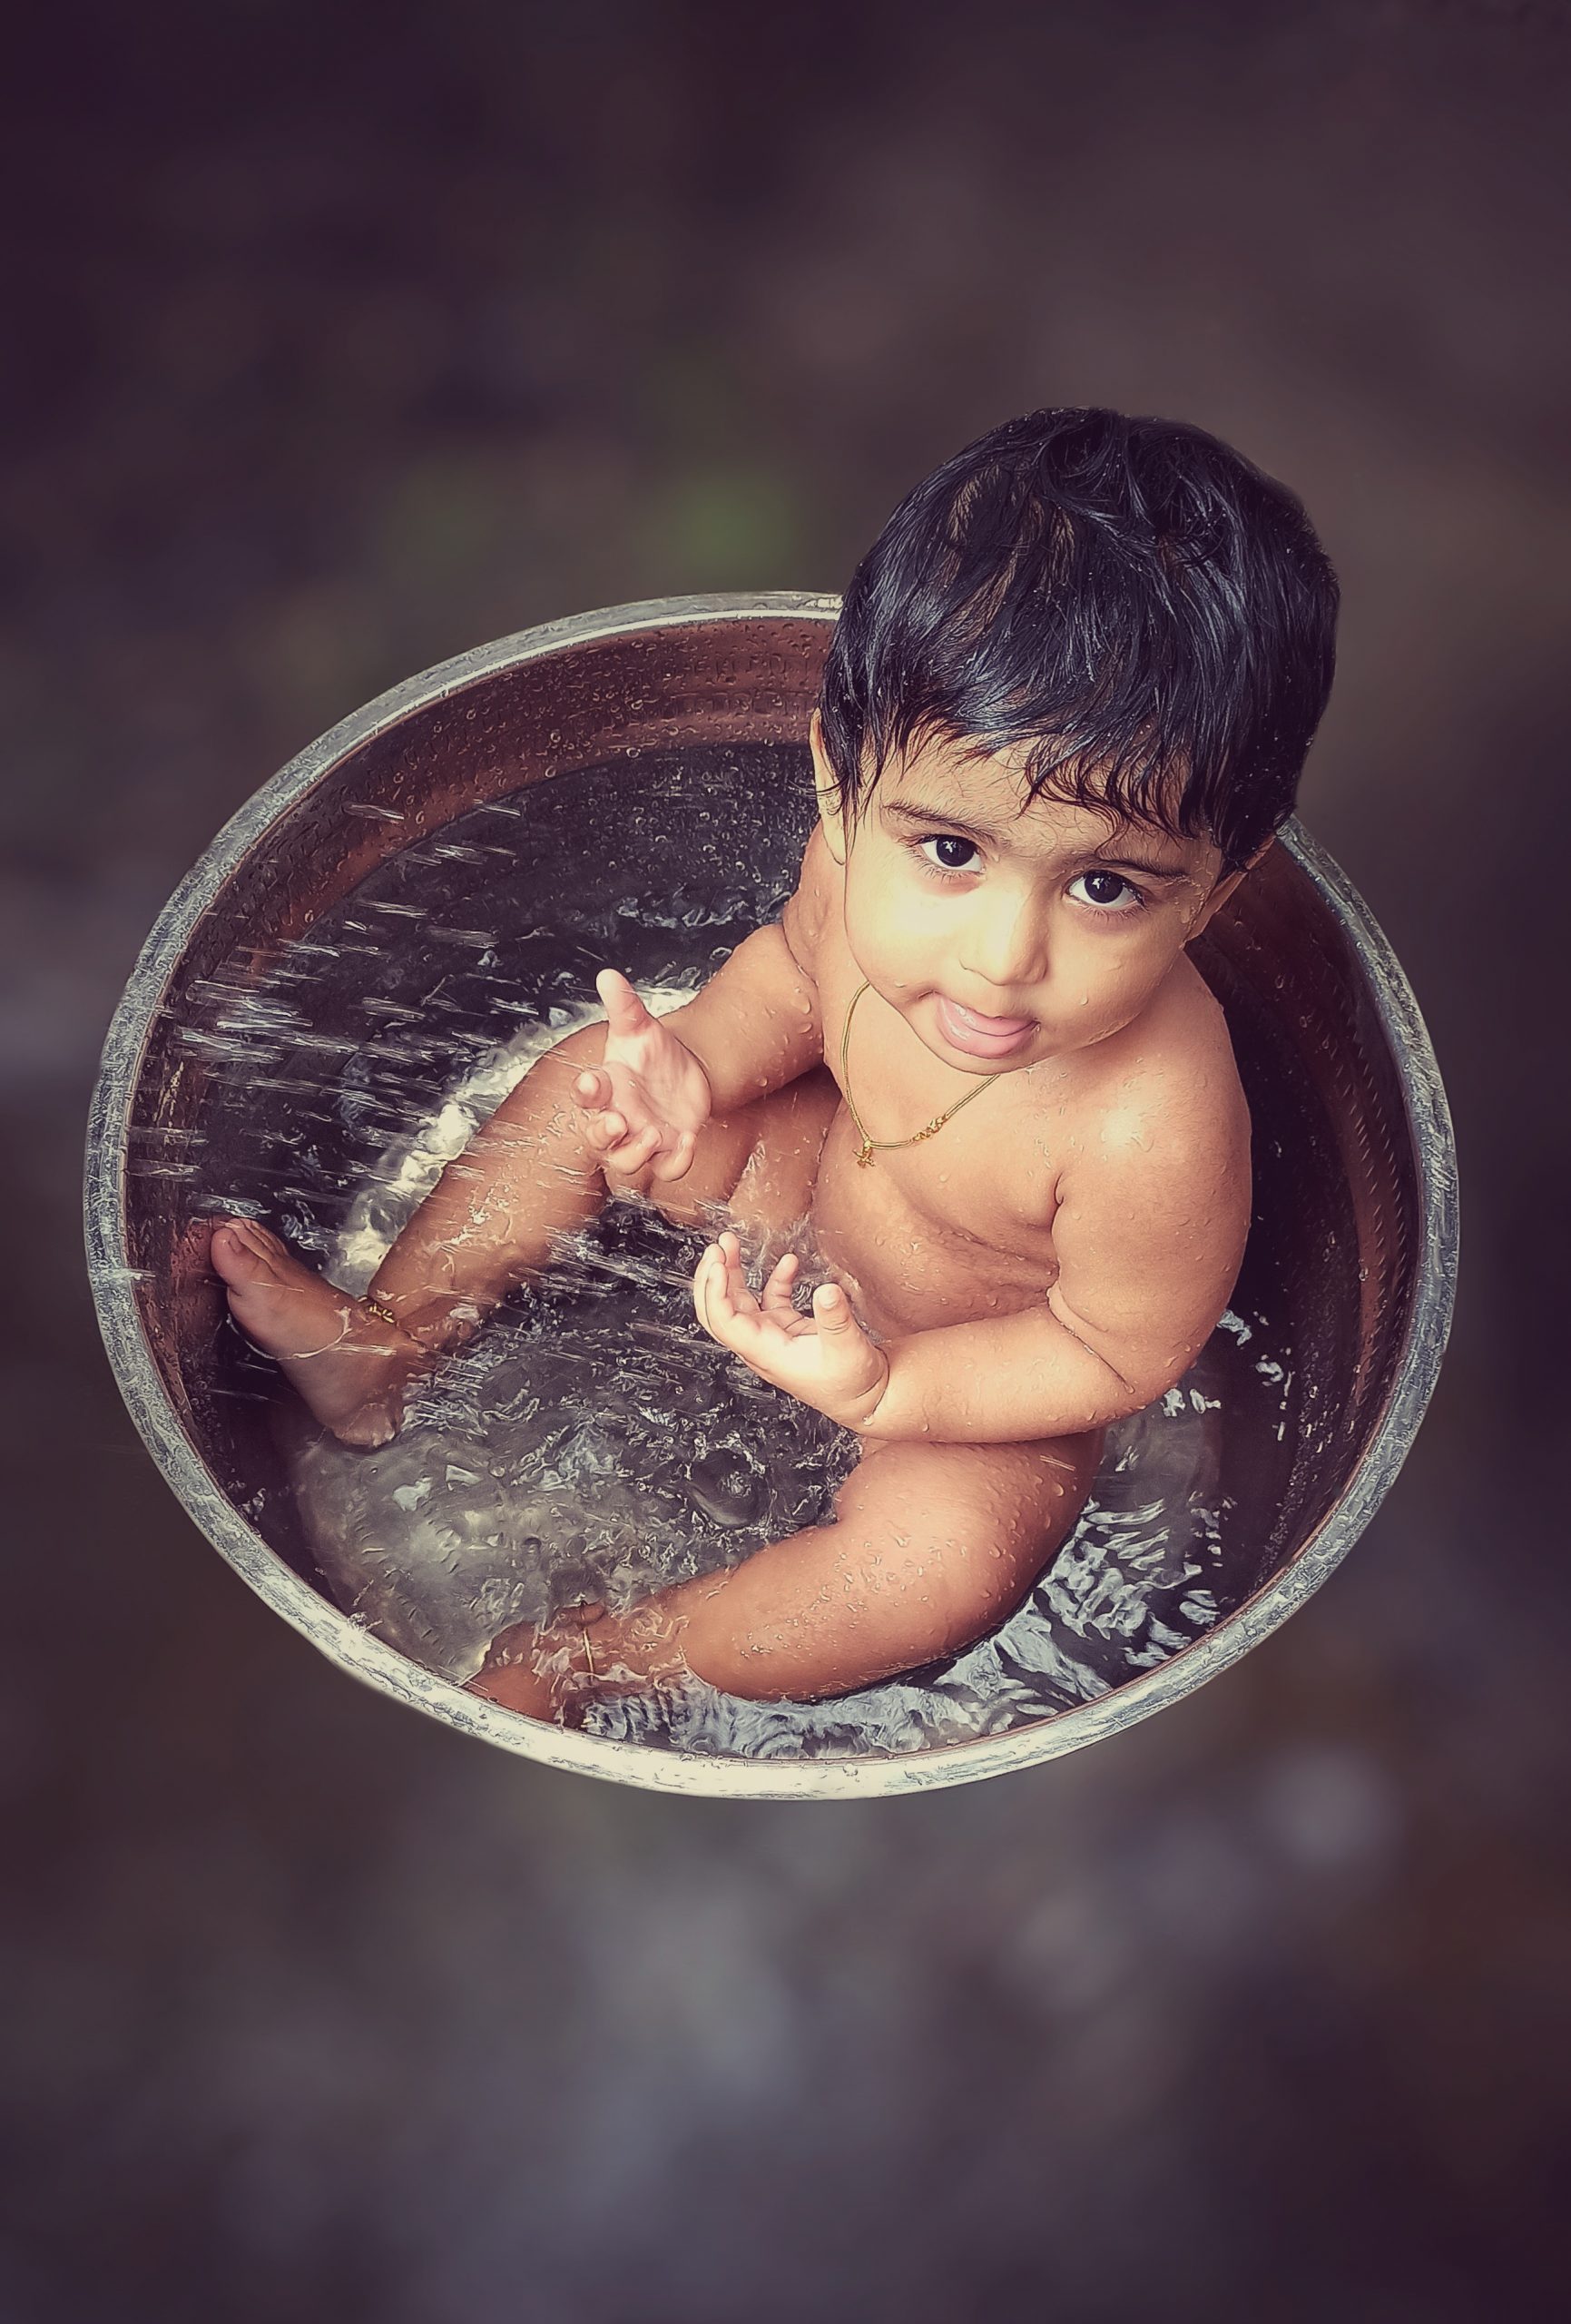 A toddler bathing in a tub